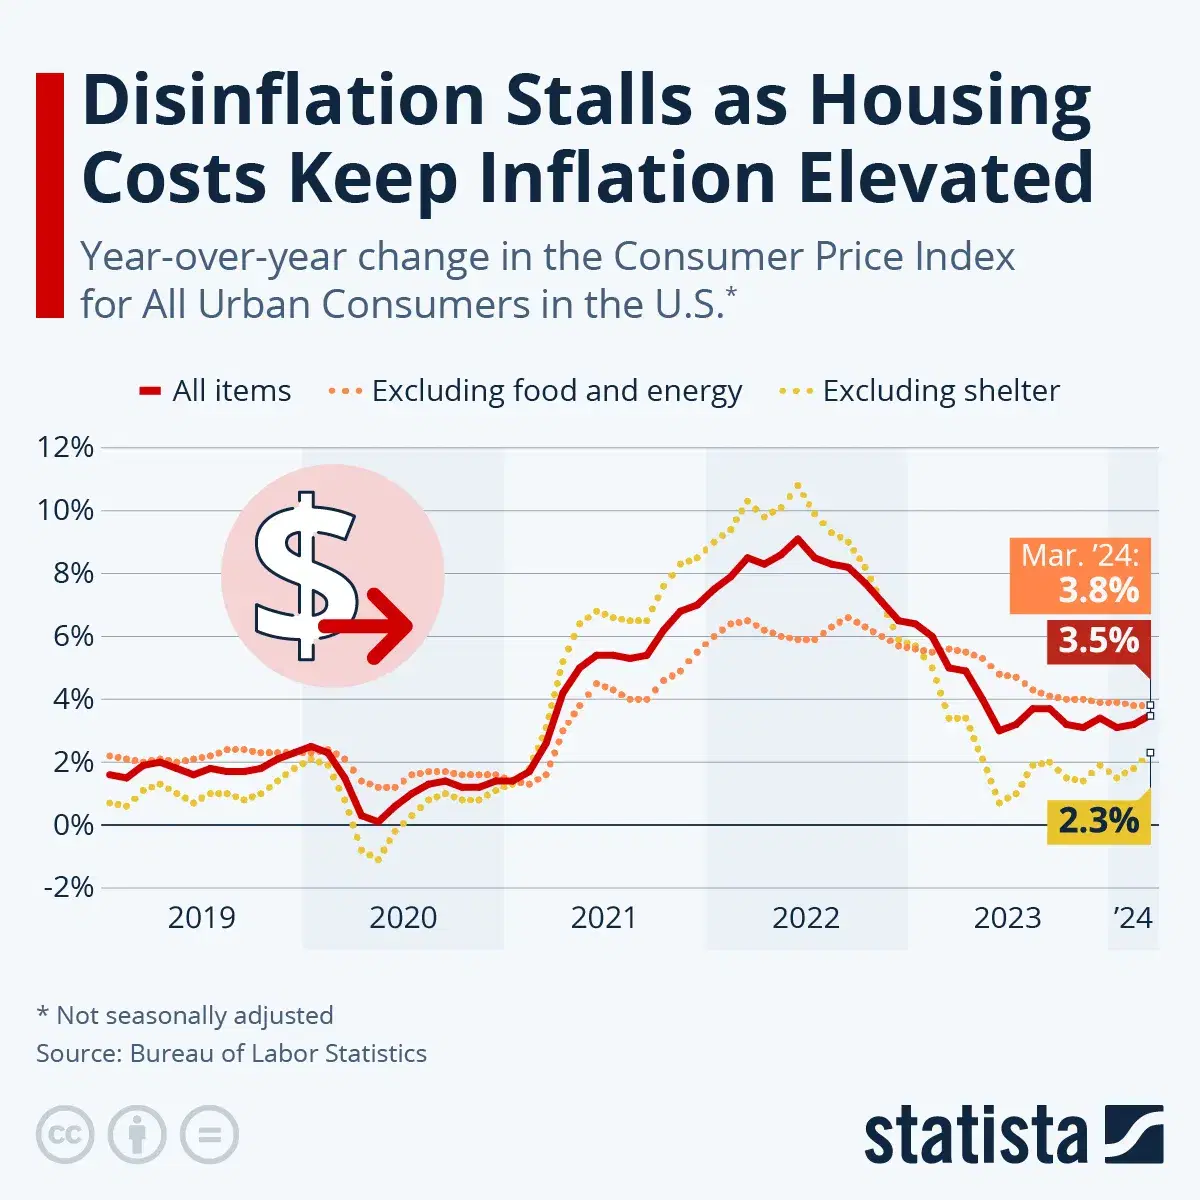 Disinflation Stalls as Housing Costs Keep Inflation Elevated